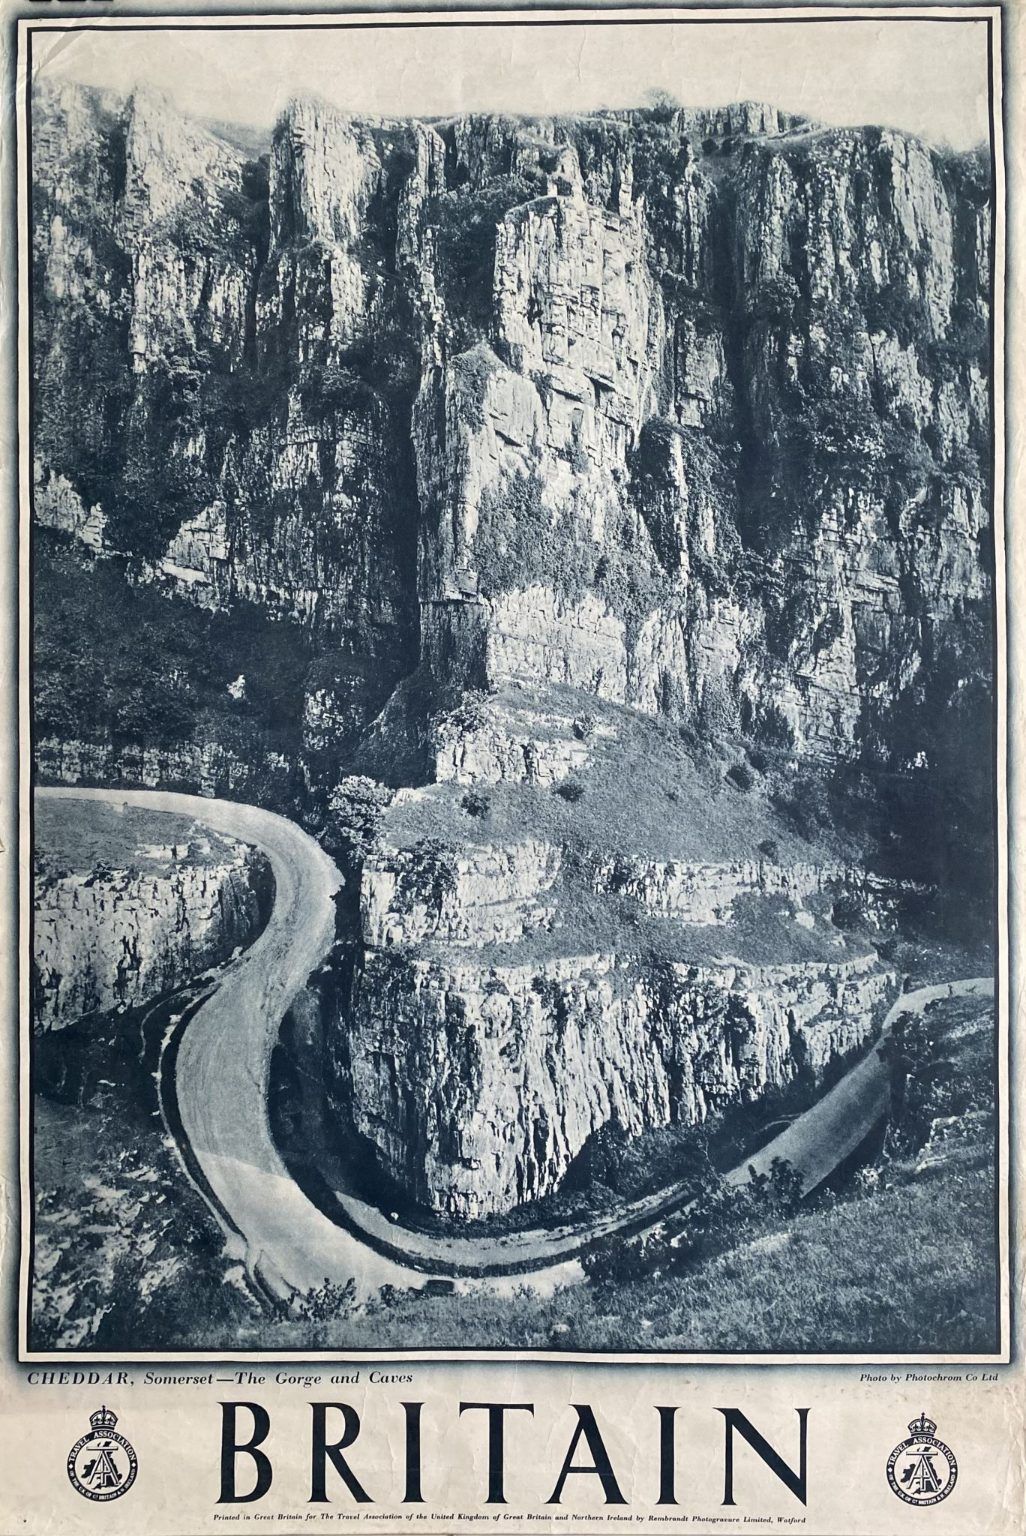 VINTAGE POSTER: BRITAIN - The Gorge and Caves of Somerset